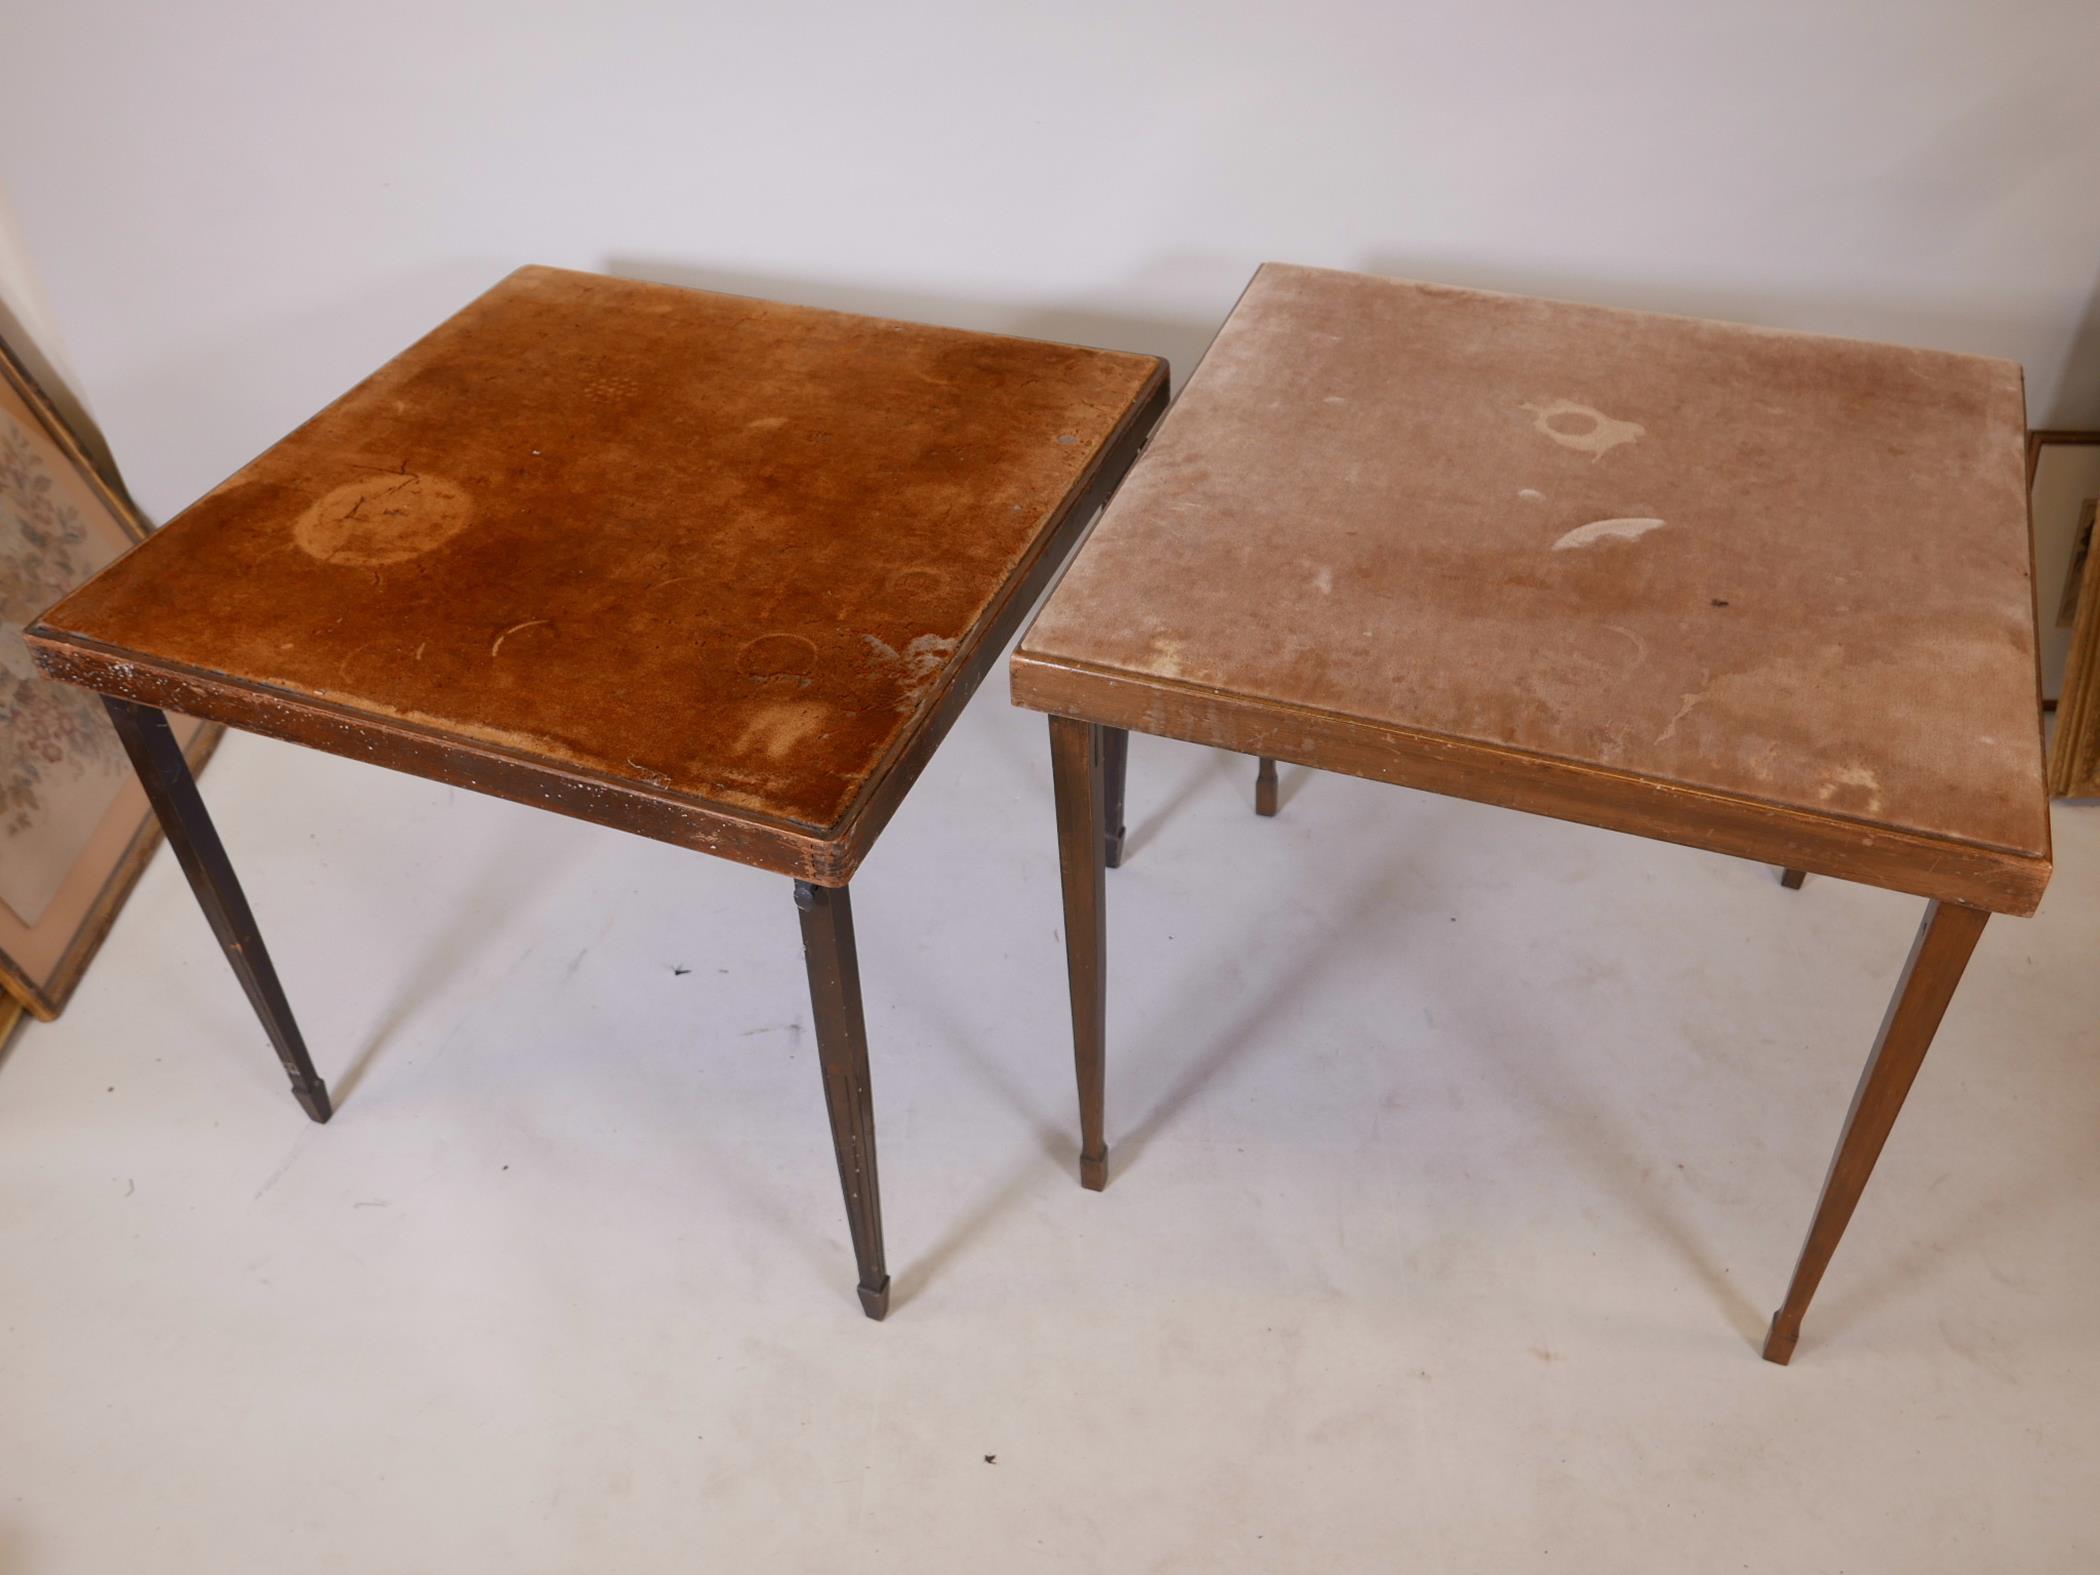 Two fold out card tables, 30" x 30" x 27" high - Image 2 of 2